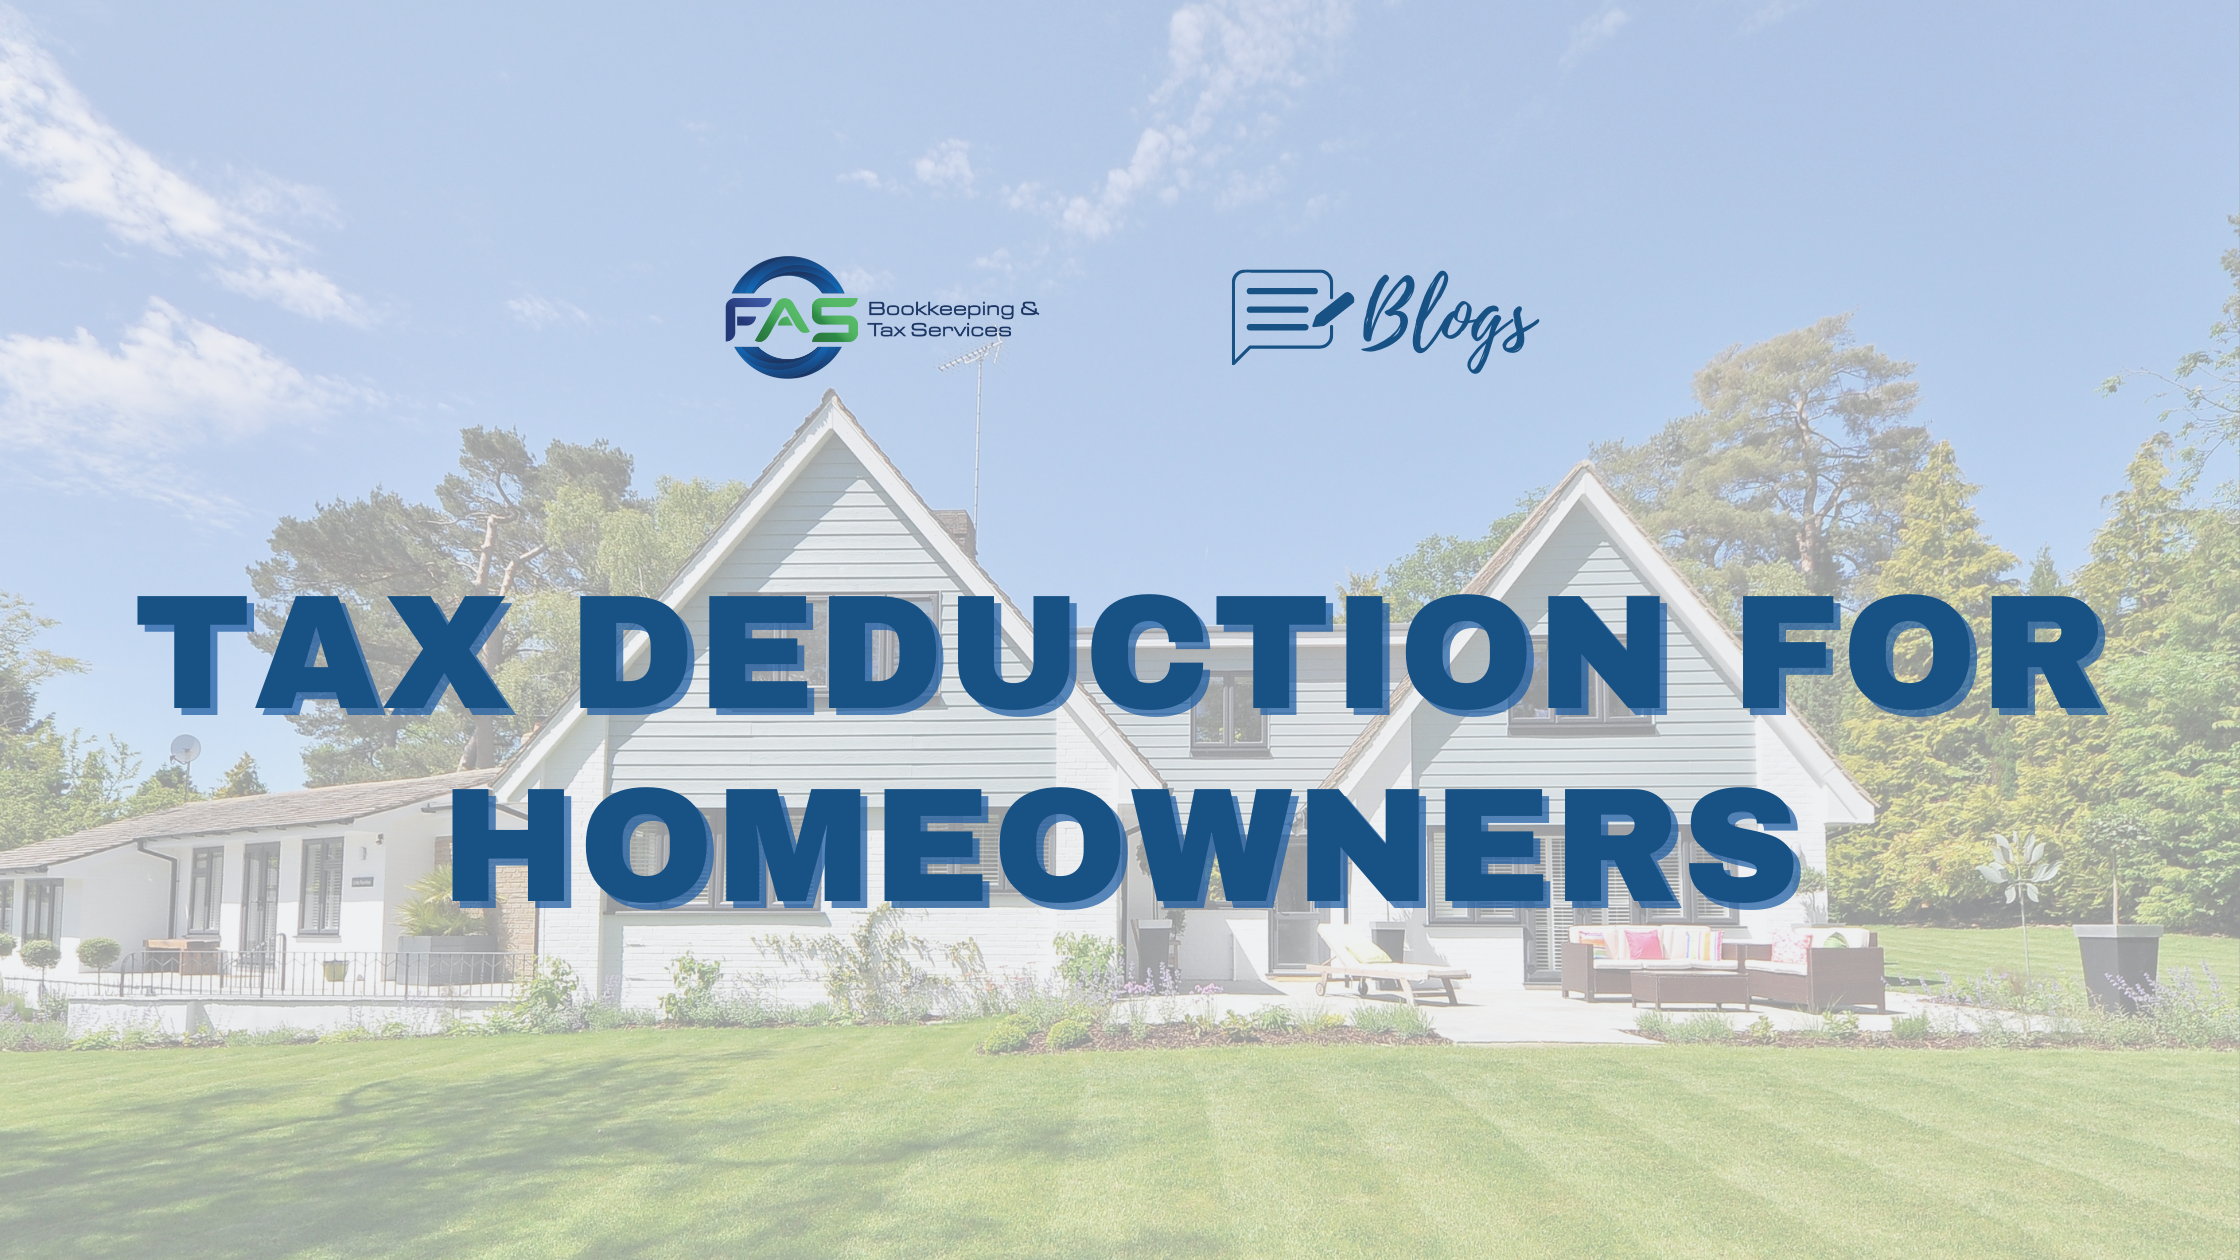 Tax Deduction for Homeowners